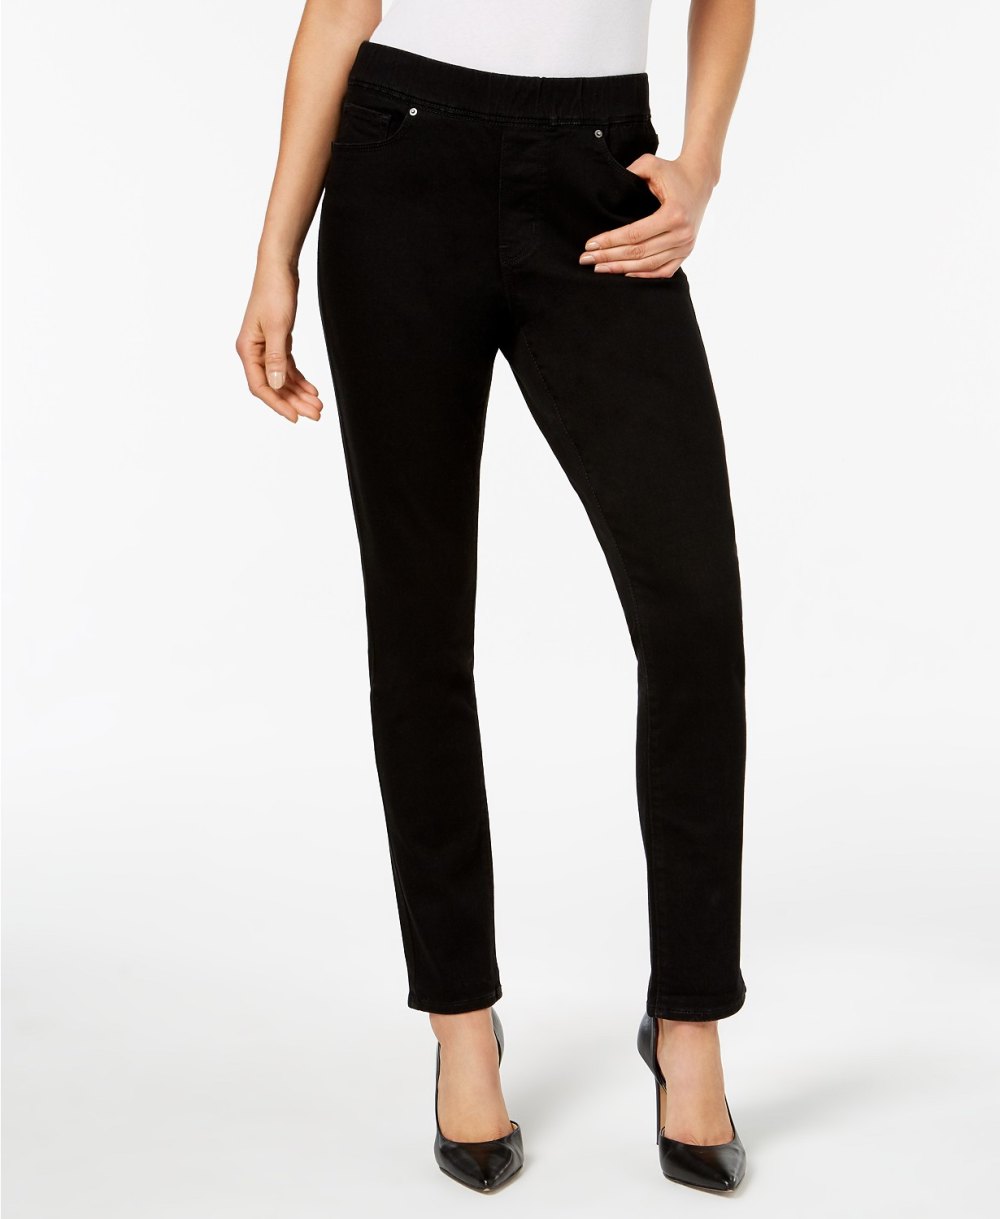 Levi's Skinny Perfectly Slimming Pull-On Jeggings black